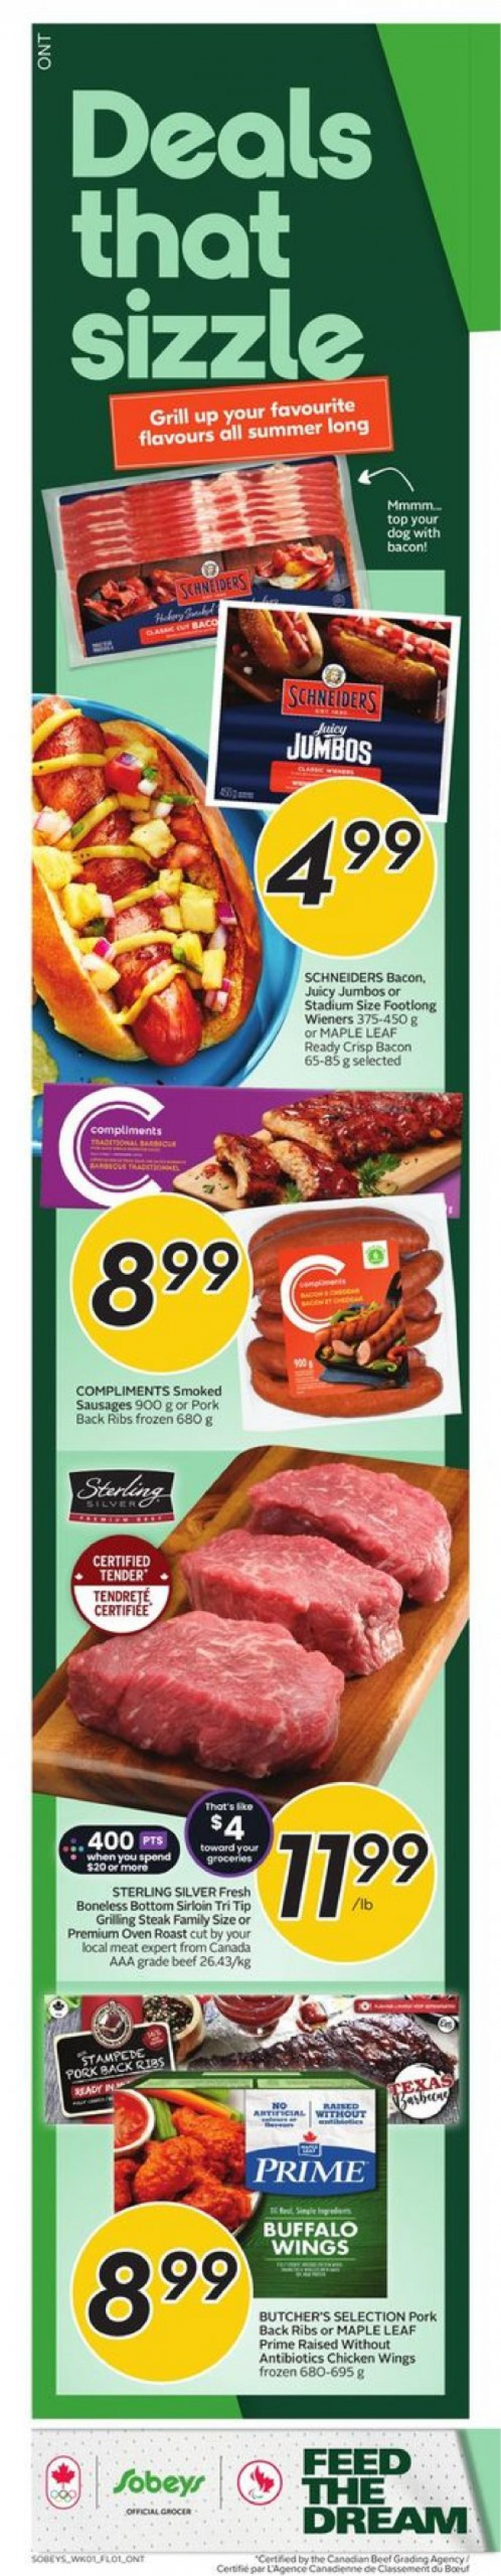 sobeys - Sobeys - Weekly Flyer - Ontario flyer current 02.05. - 08.05. - page: 2